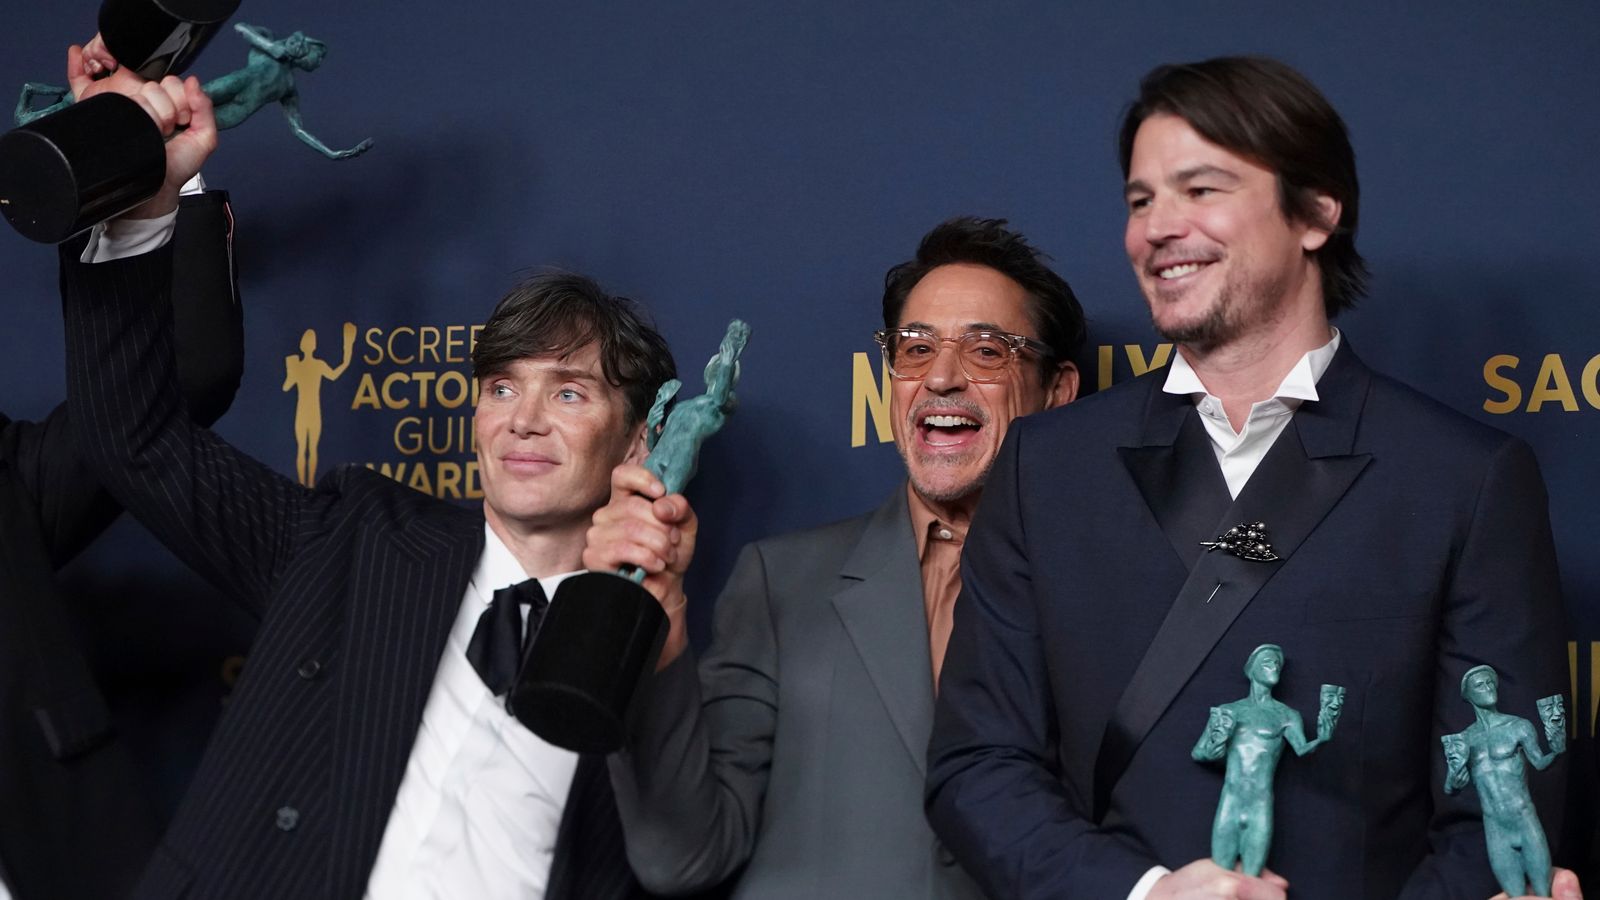 Cillian Murphy and Oppenheimer Win Big at the 30th Annual SAG Awards